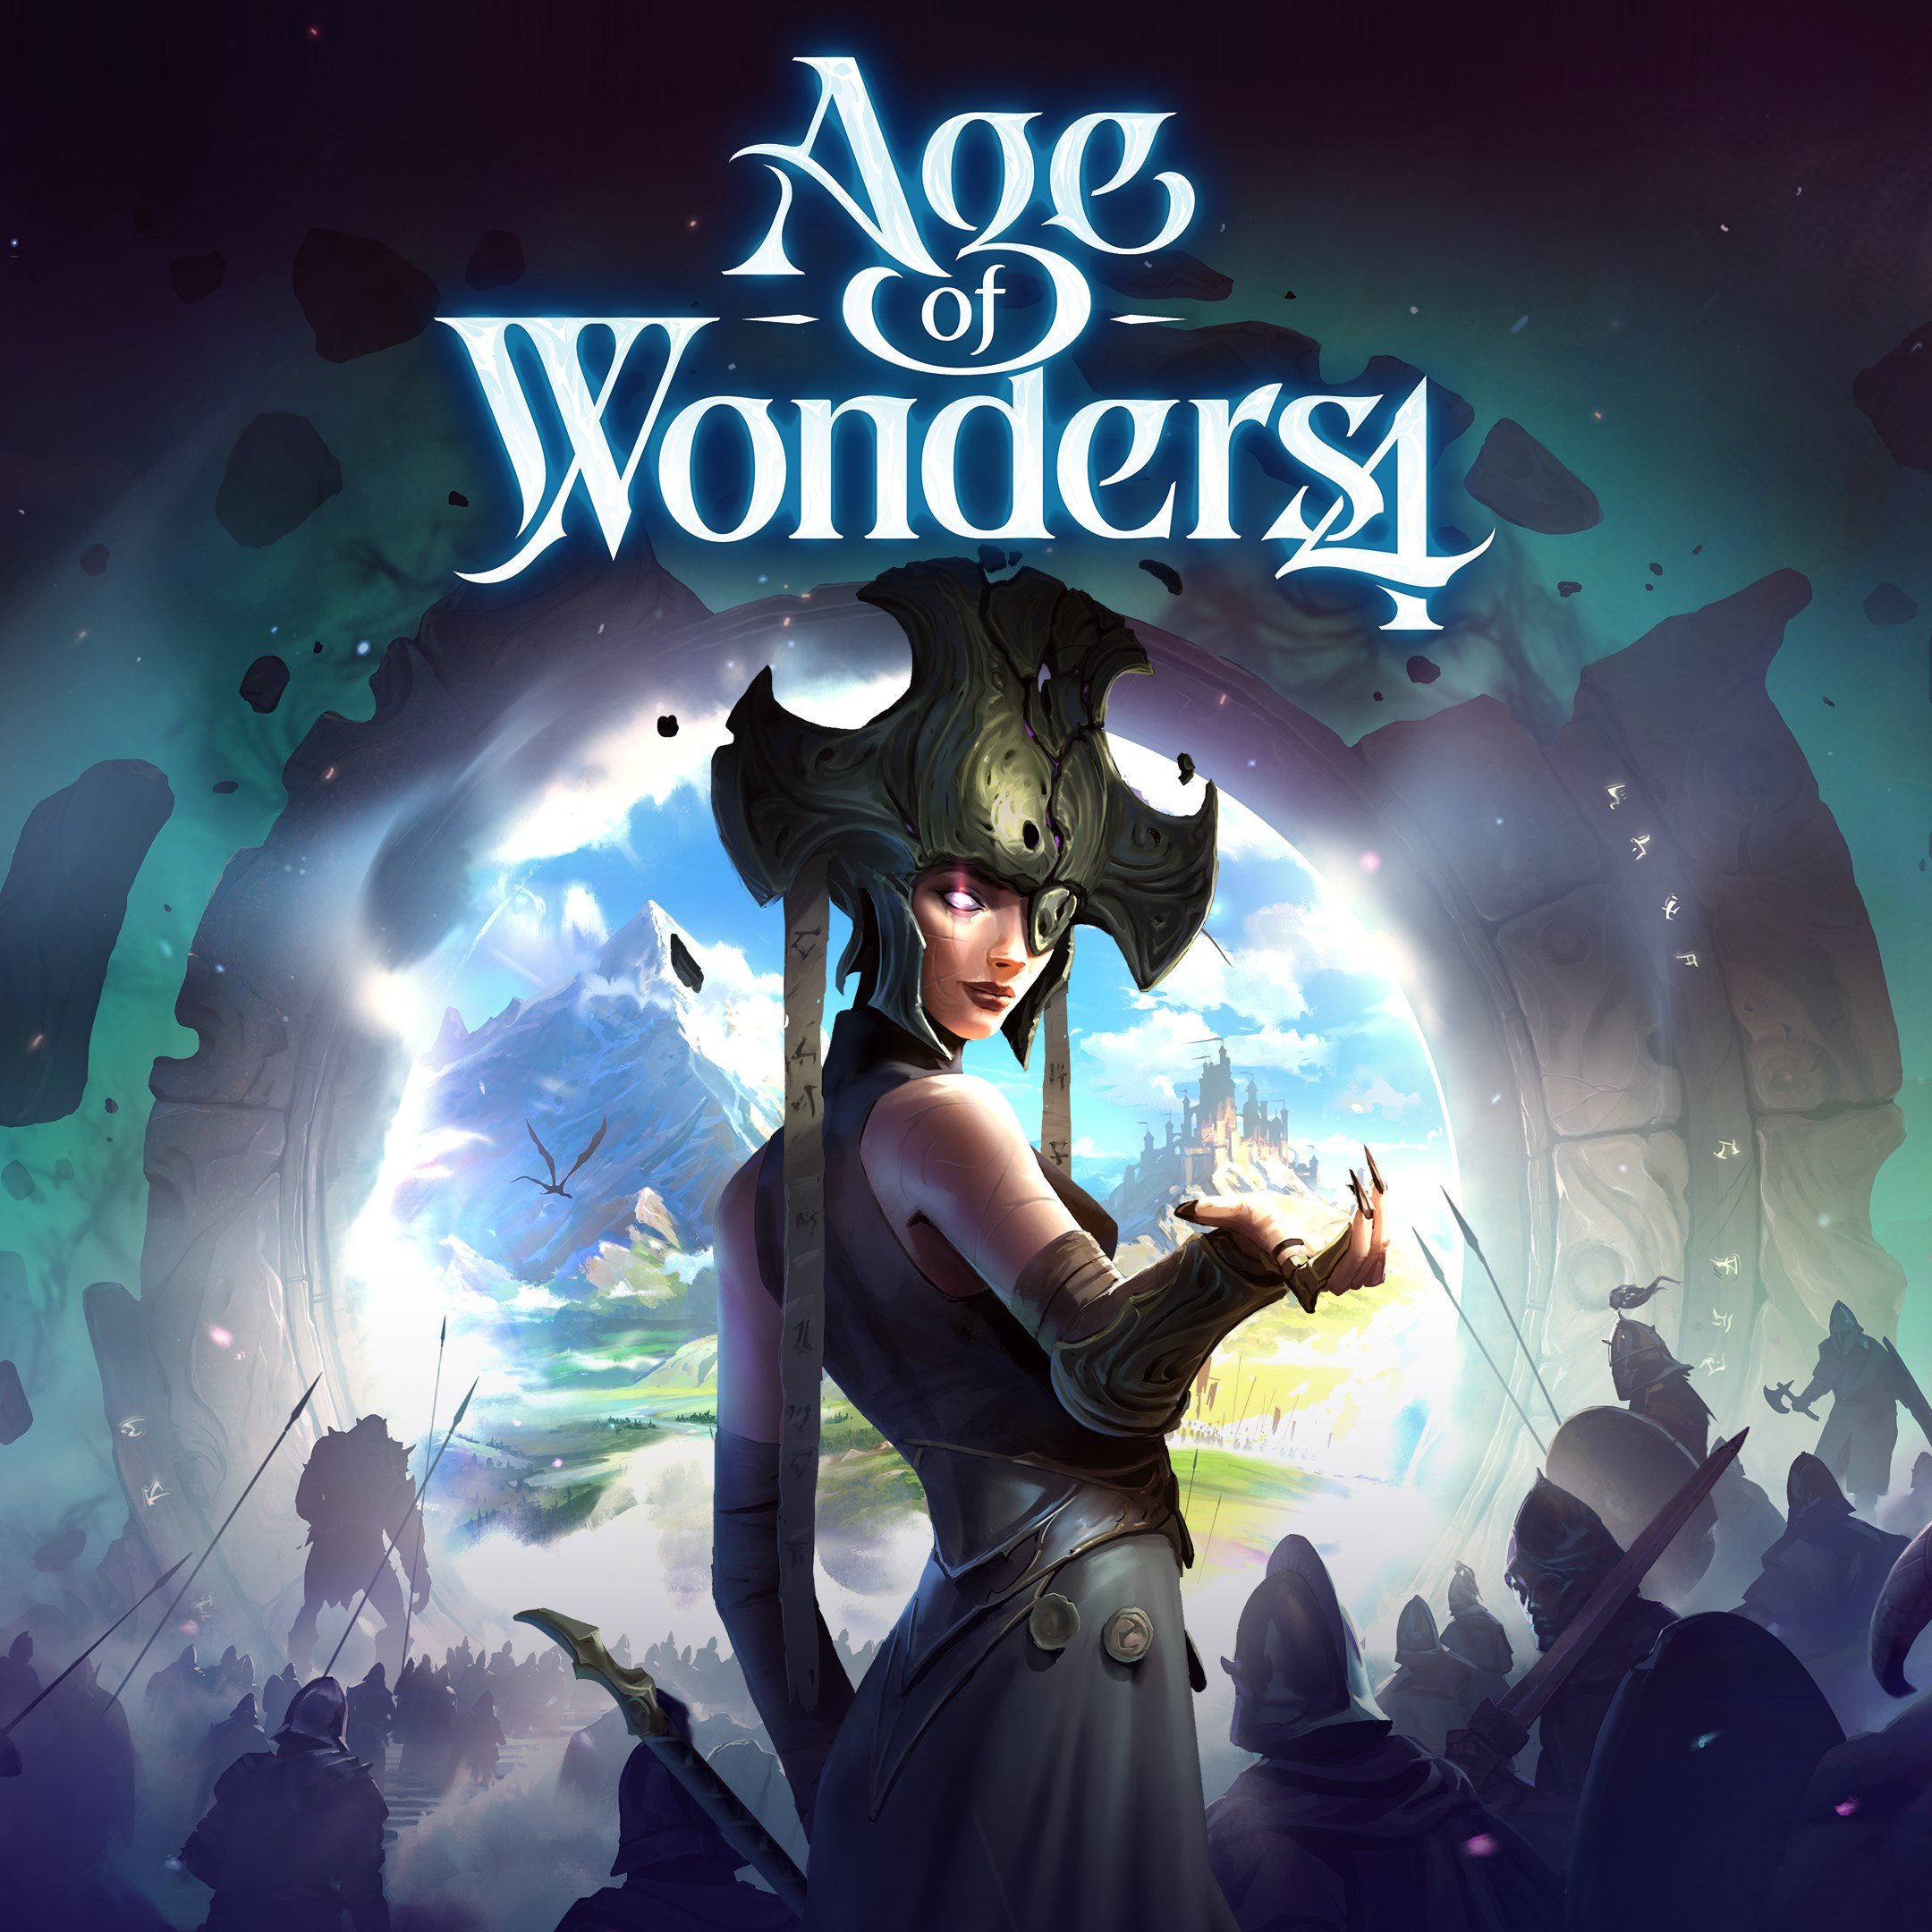 Boxart for Age of Wonders 4